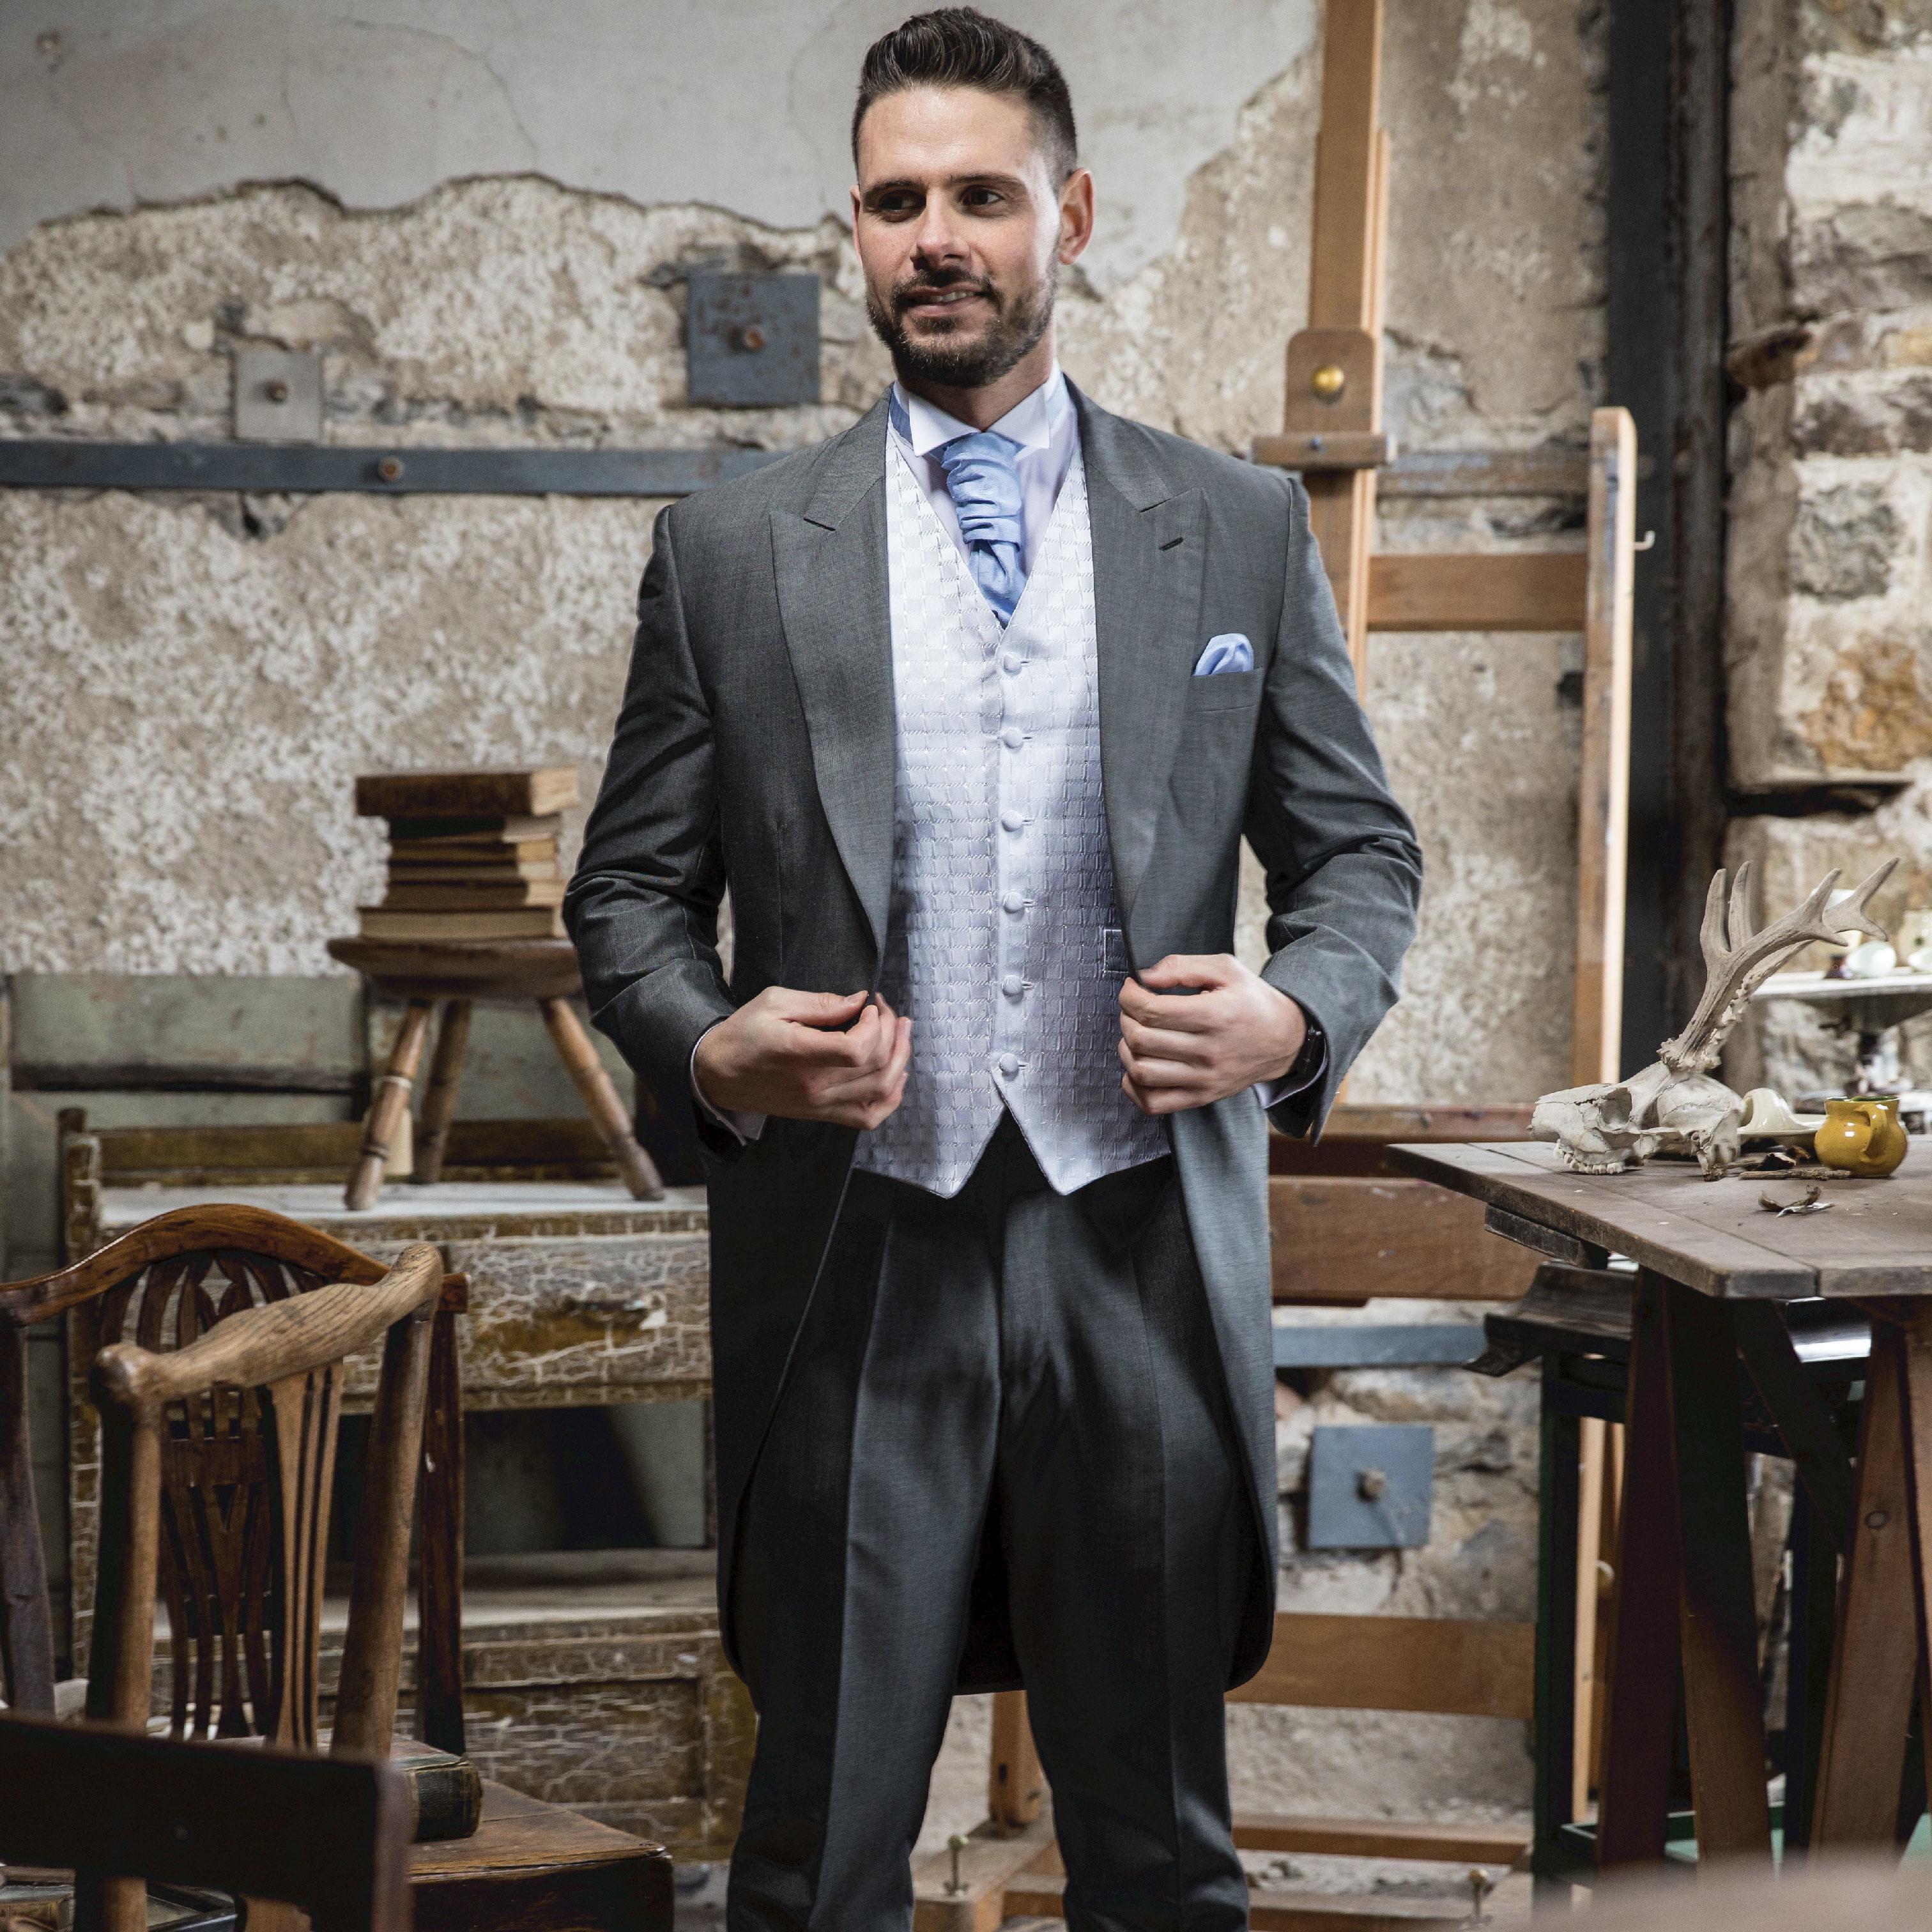 Men & Boy's Lightweight Wedding Suit | Available to Hire or Buy ...